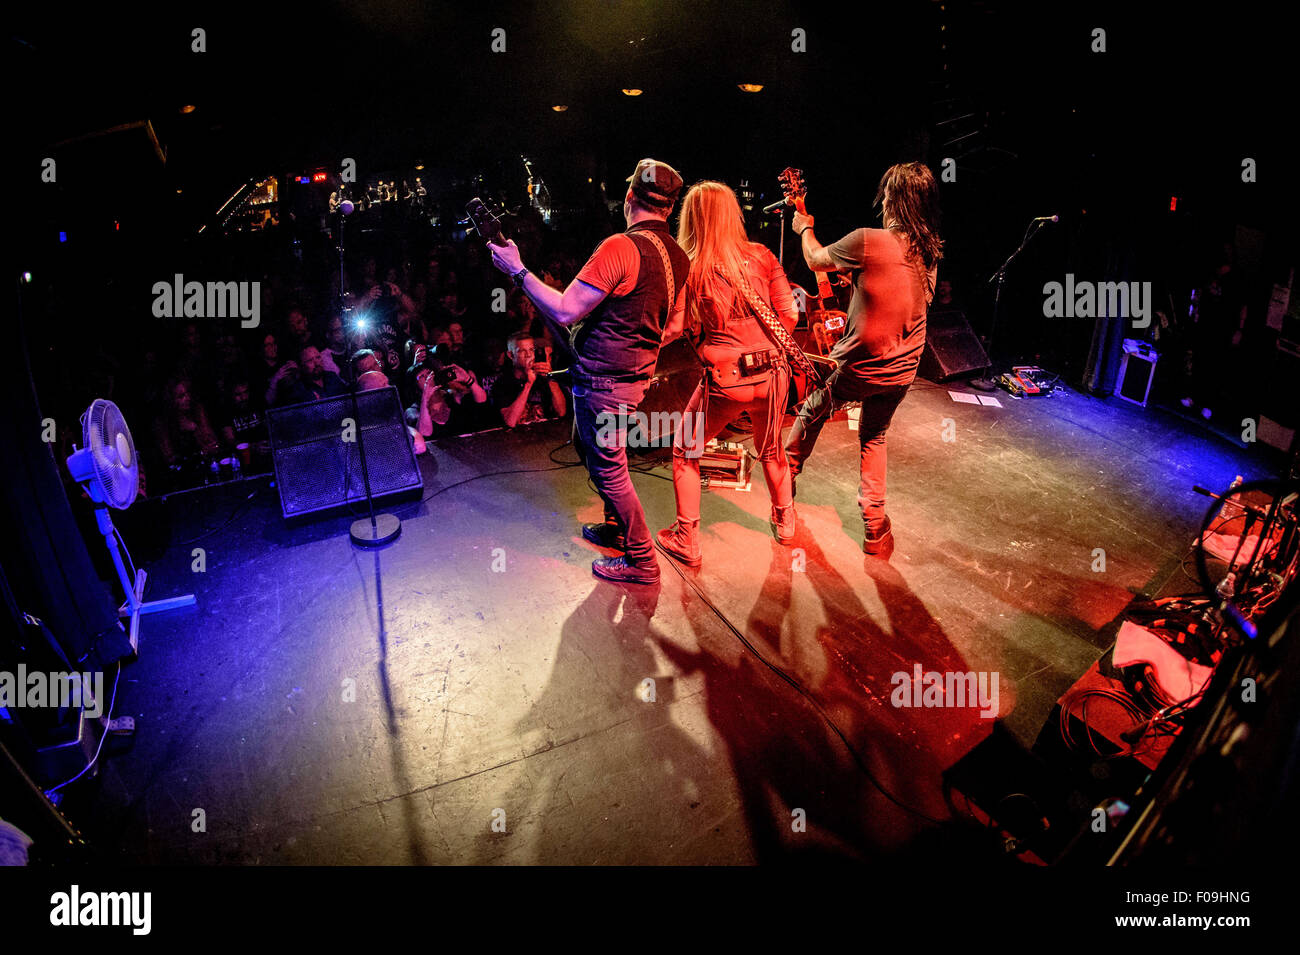 Toronto, Ontario, Canada. 9th Aug, 2015. English-American rock singer/songwriter/guitarist LITA FORD performed a show at Phoenix Theatre in Toronto. Band members: BOBBY ROCK, MARTY O'BRIEN, PARTICK KENNISON © Igor Vidyashev/ZUMA Wire/Alamy Live News Stock Photo